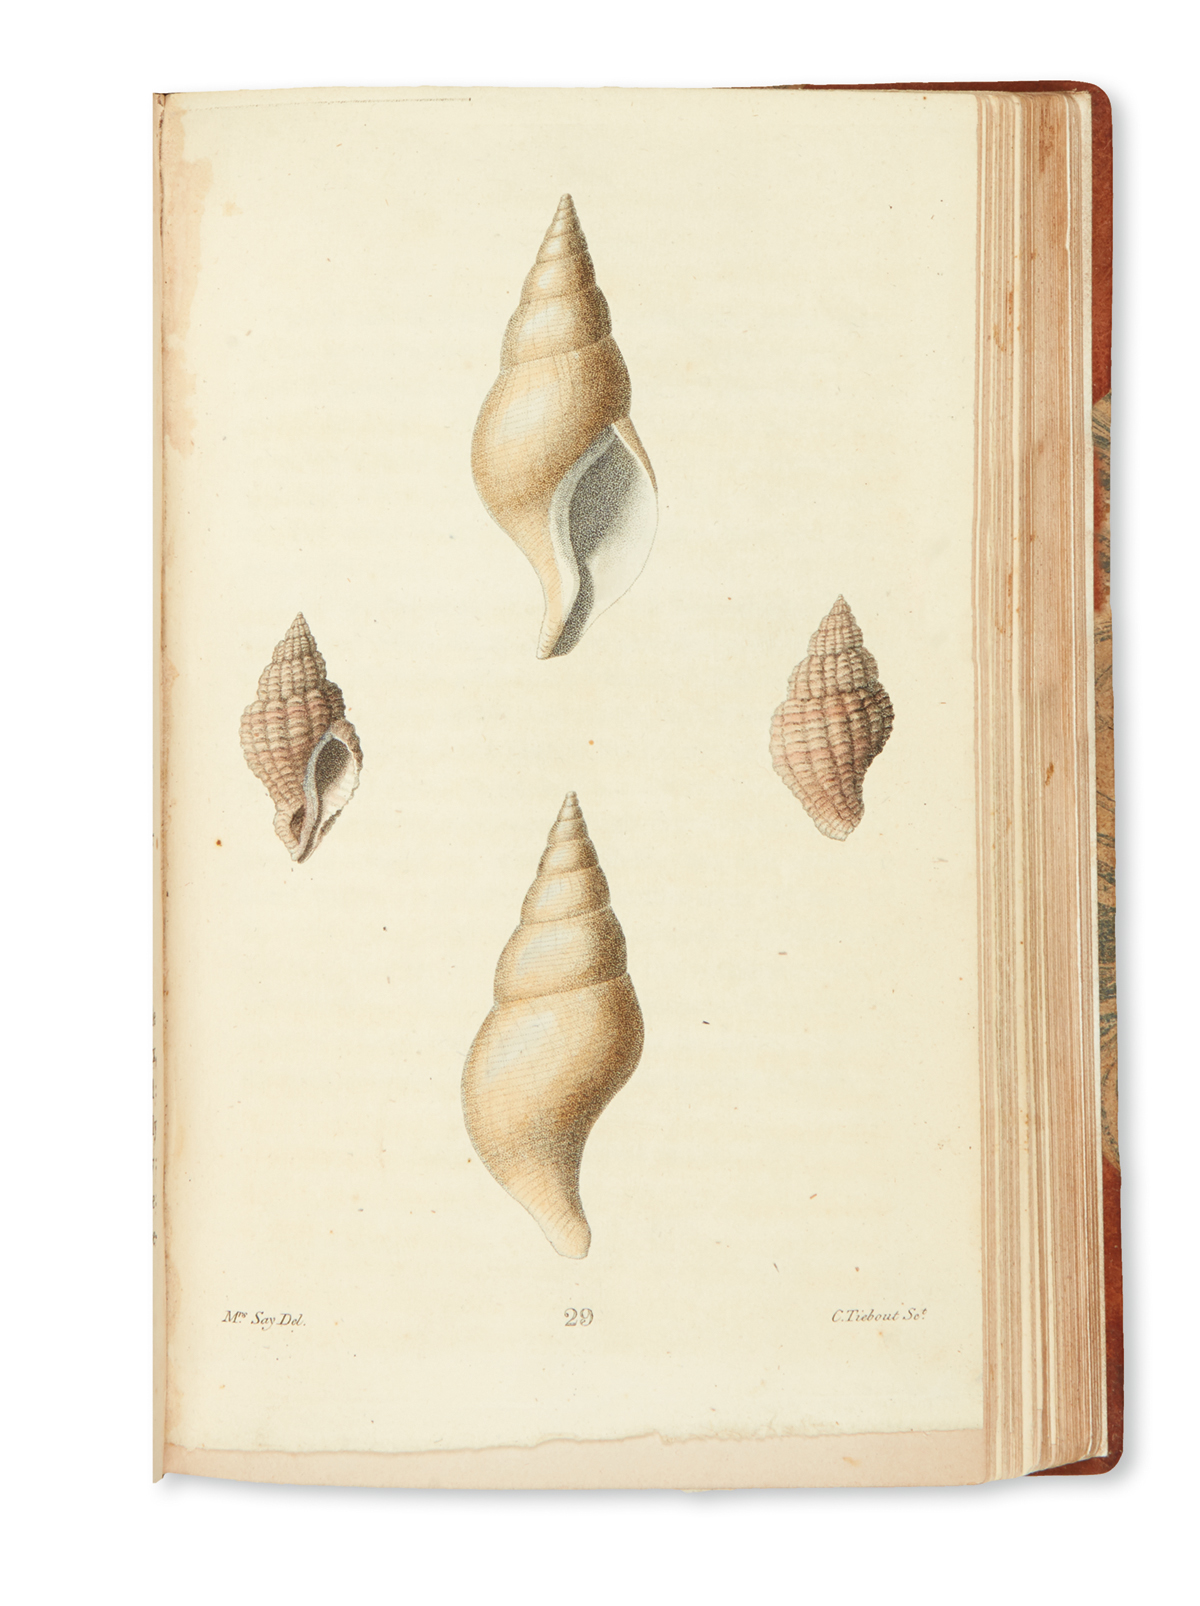 SAY, THOMAS. American Conchology, or Descriptions of the Shells of North America.